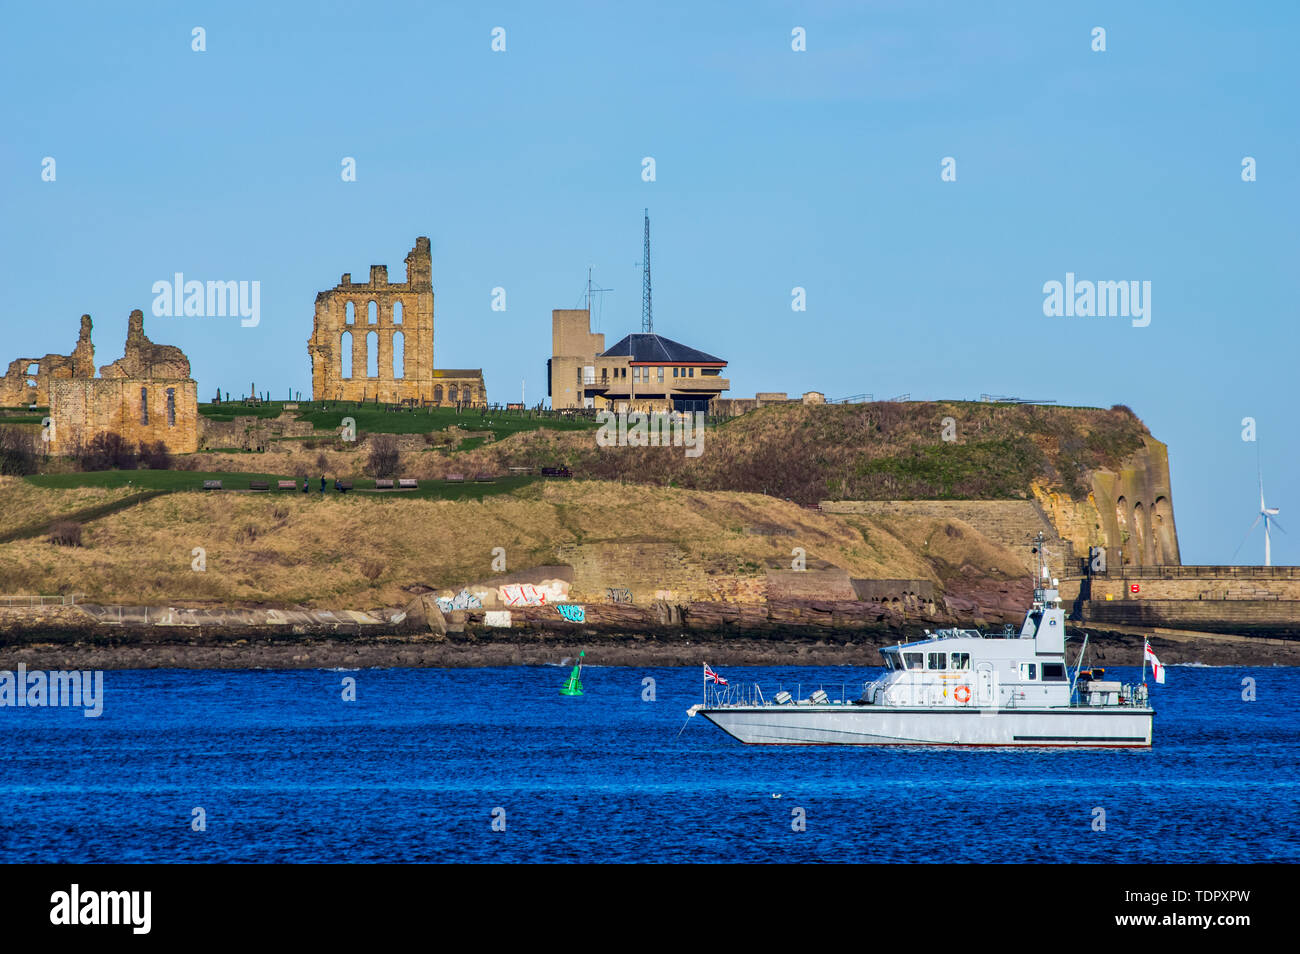 Ruins of Tynemouth Priory viewed from the River Tyne; South Shields, Tyne and Wear, England Stock Photo